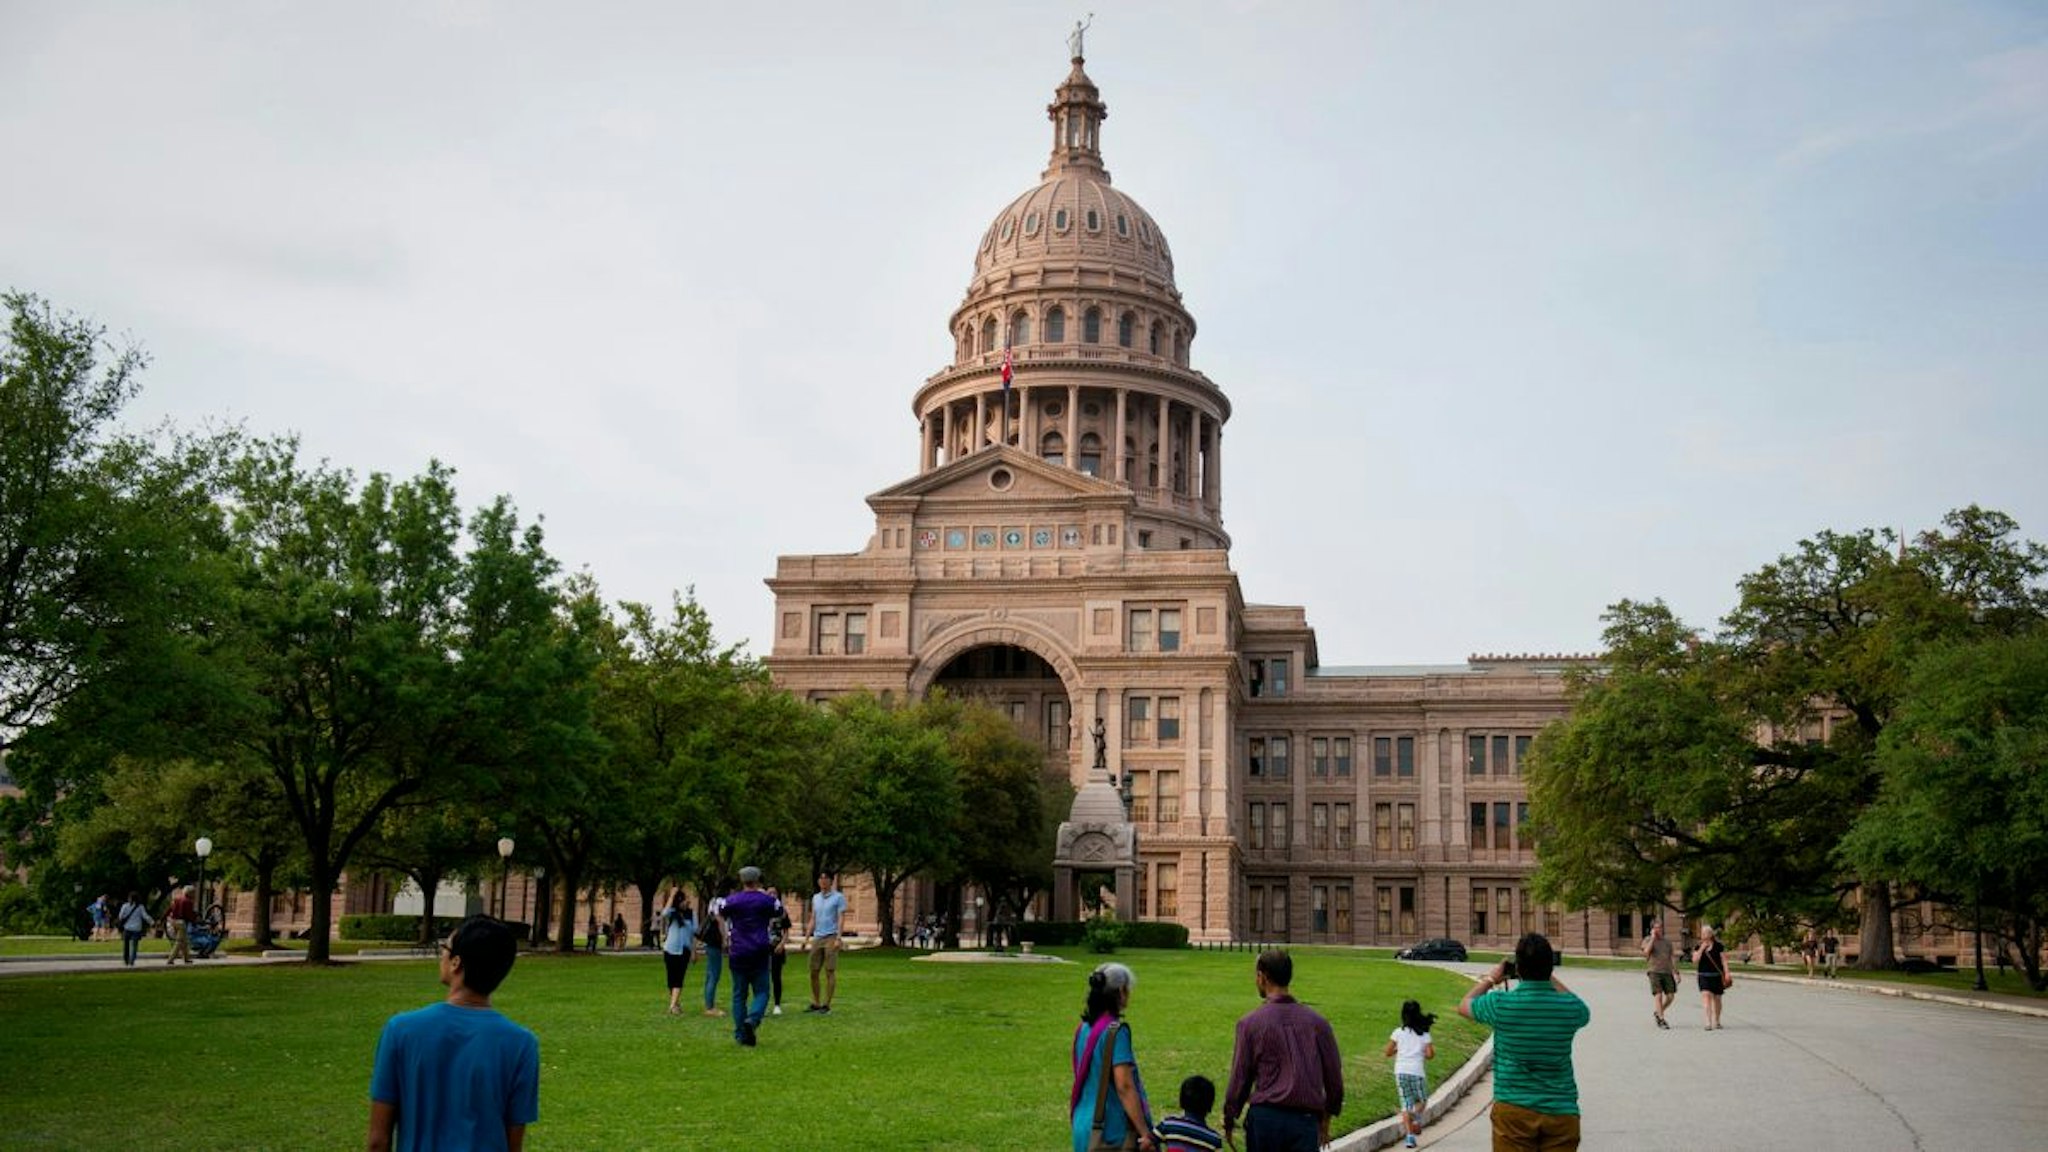 Tourists visit the Texas State Capitol building in Austin, Texas, U.S., on Friday, April 3, 2015.